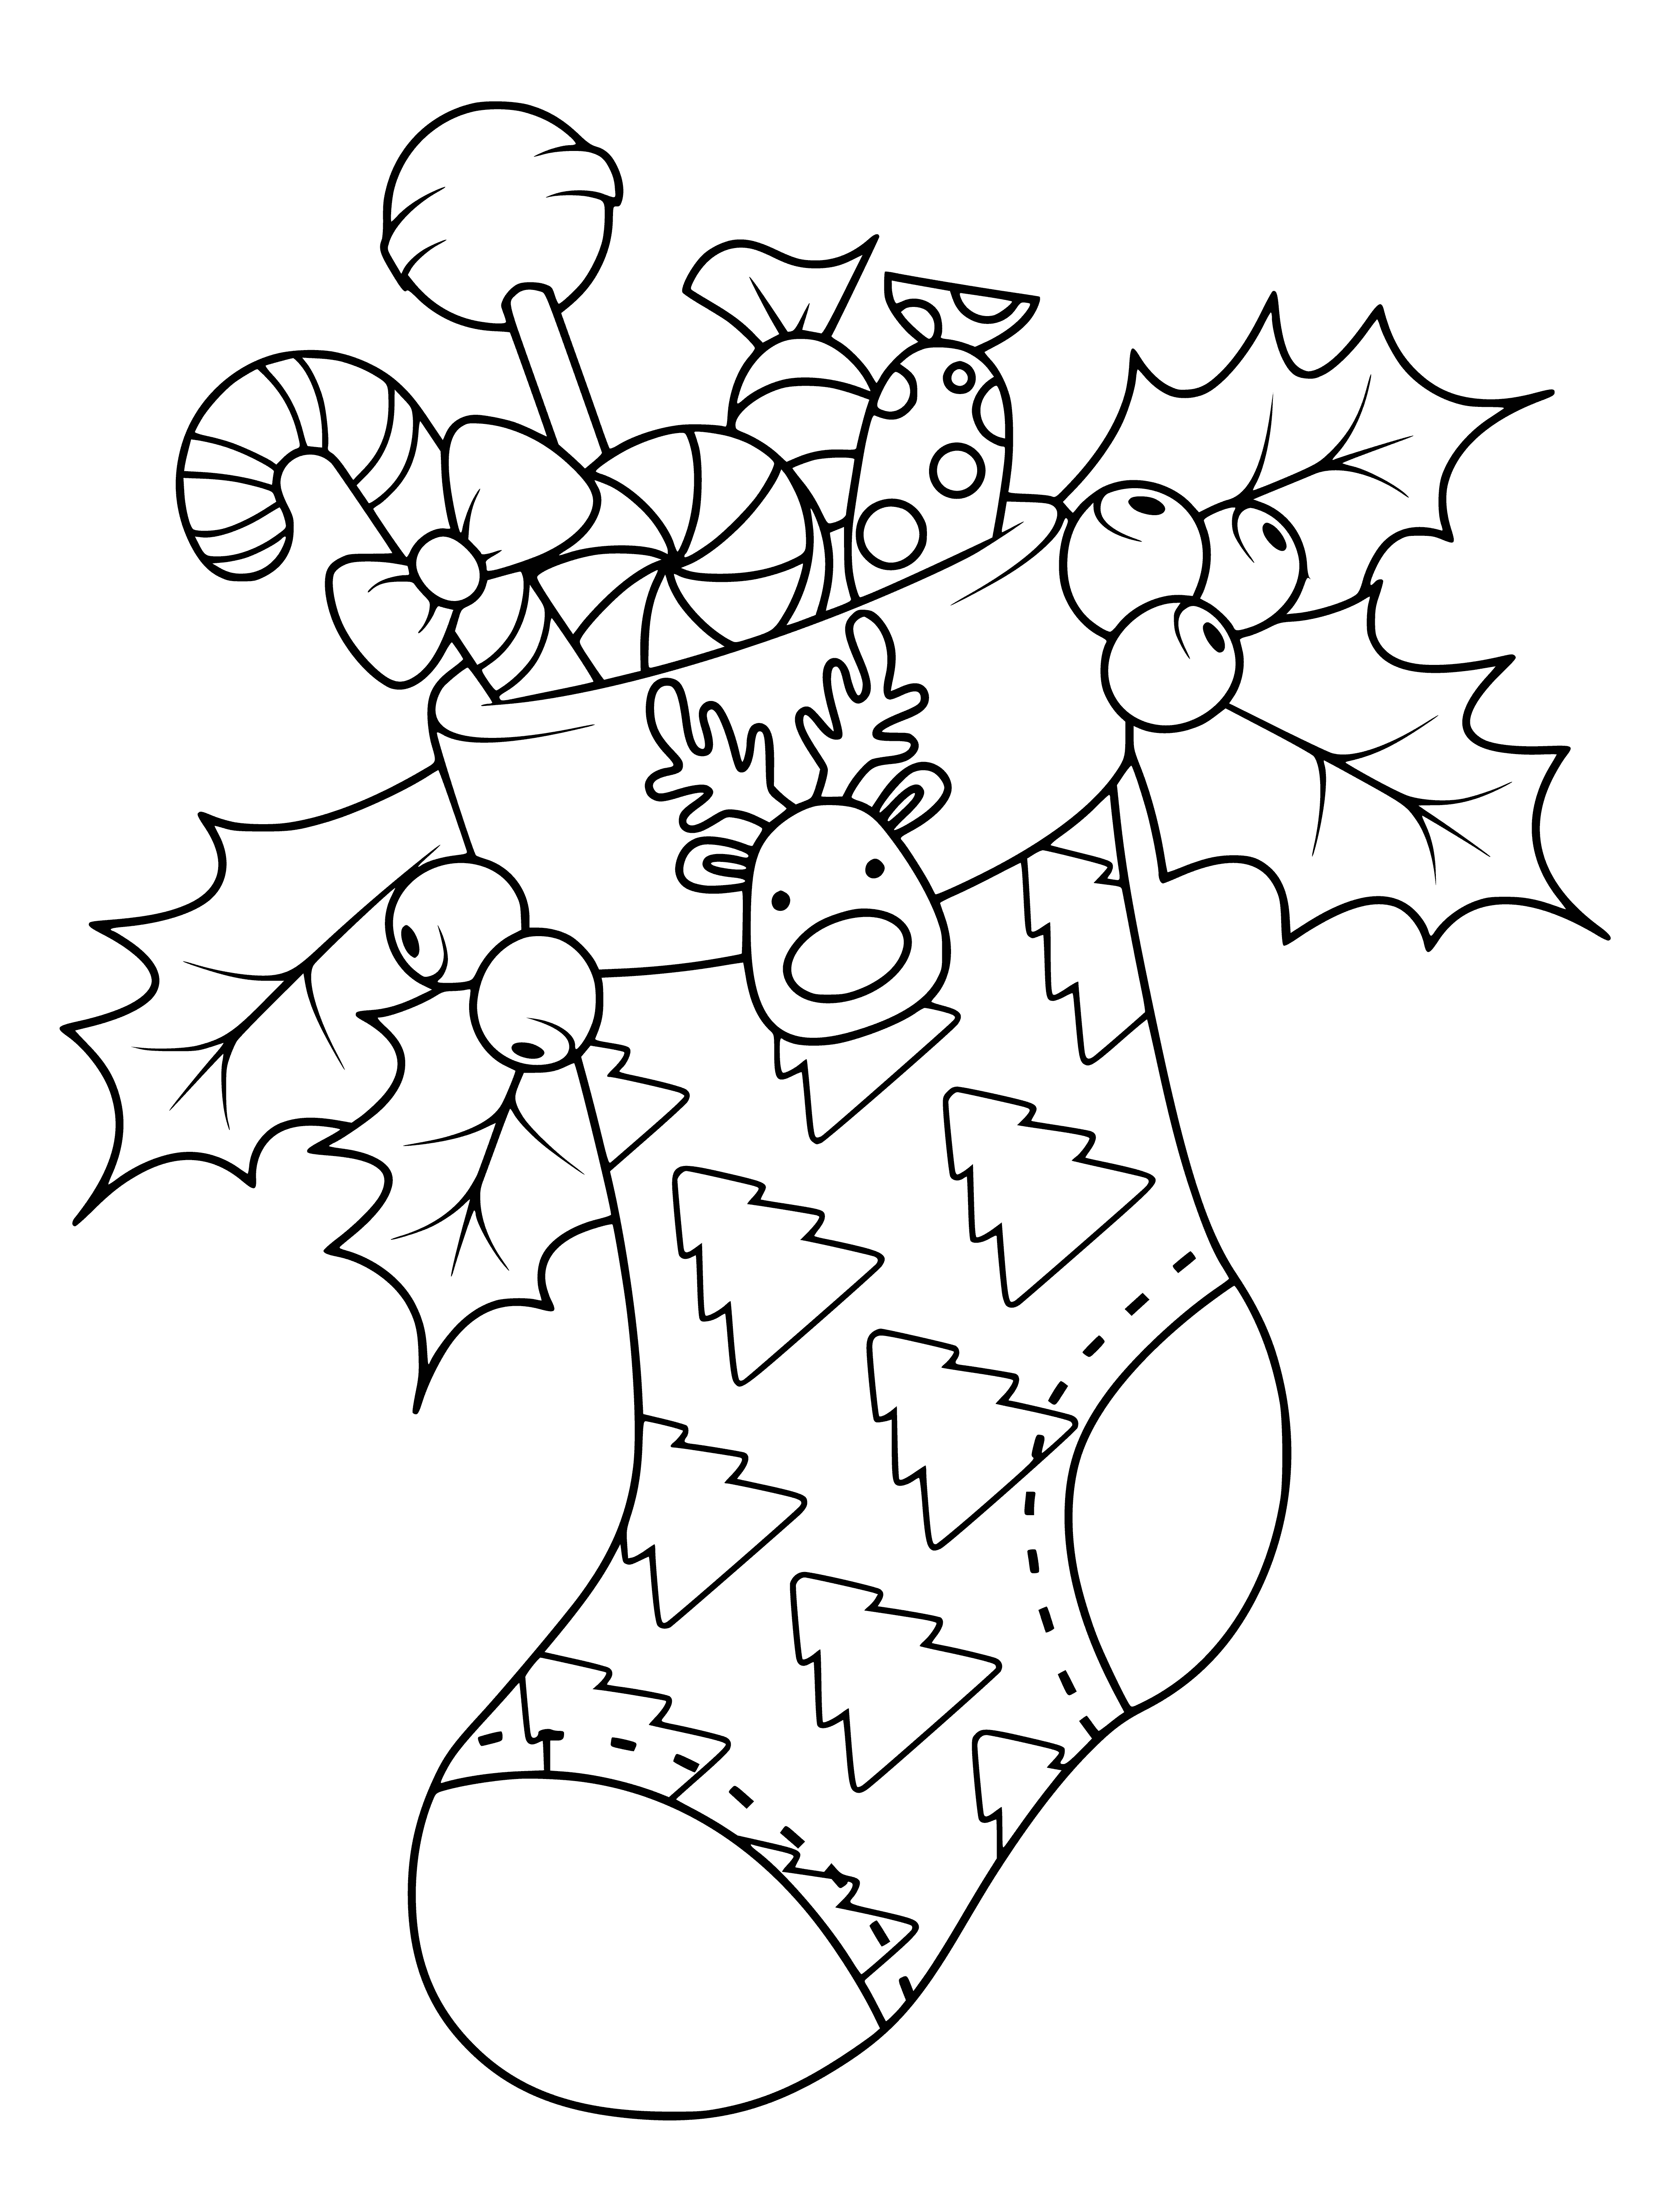 coloring page: Festive Christmas socks with red & white designs, topped with a cuff.